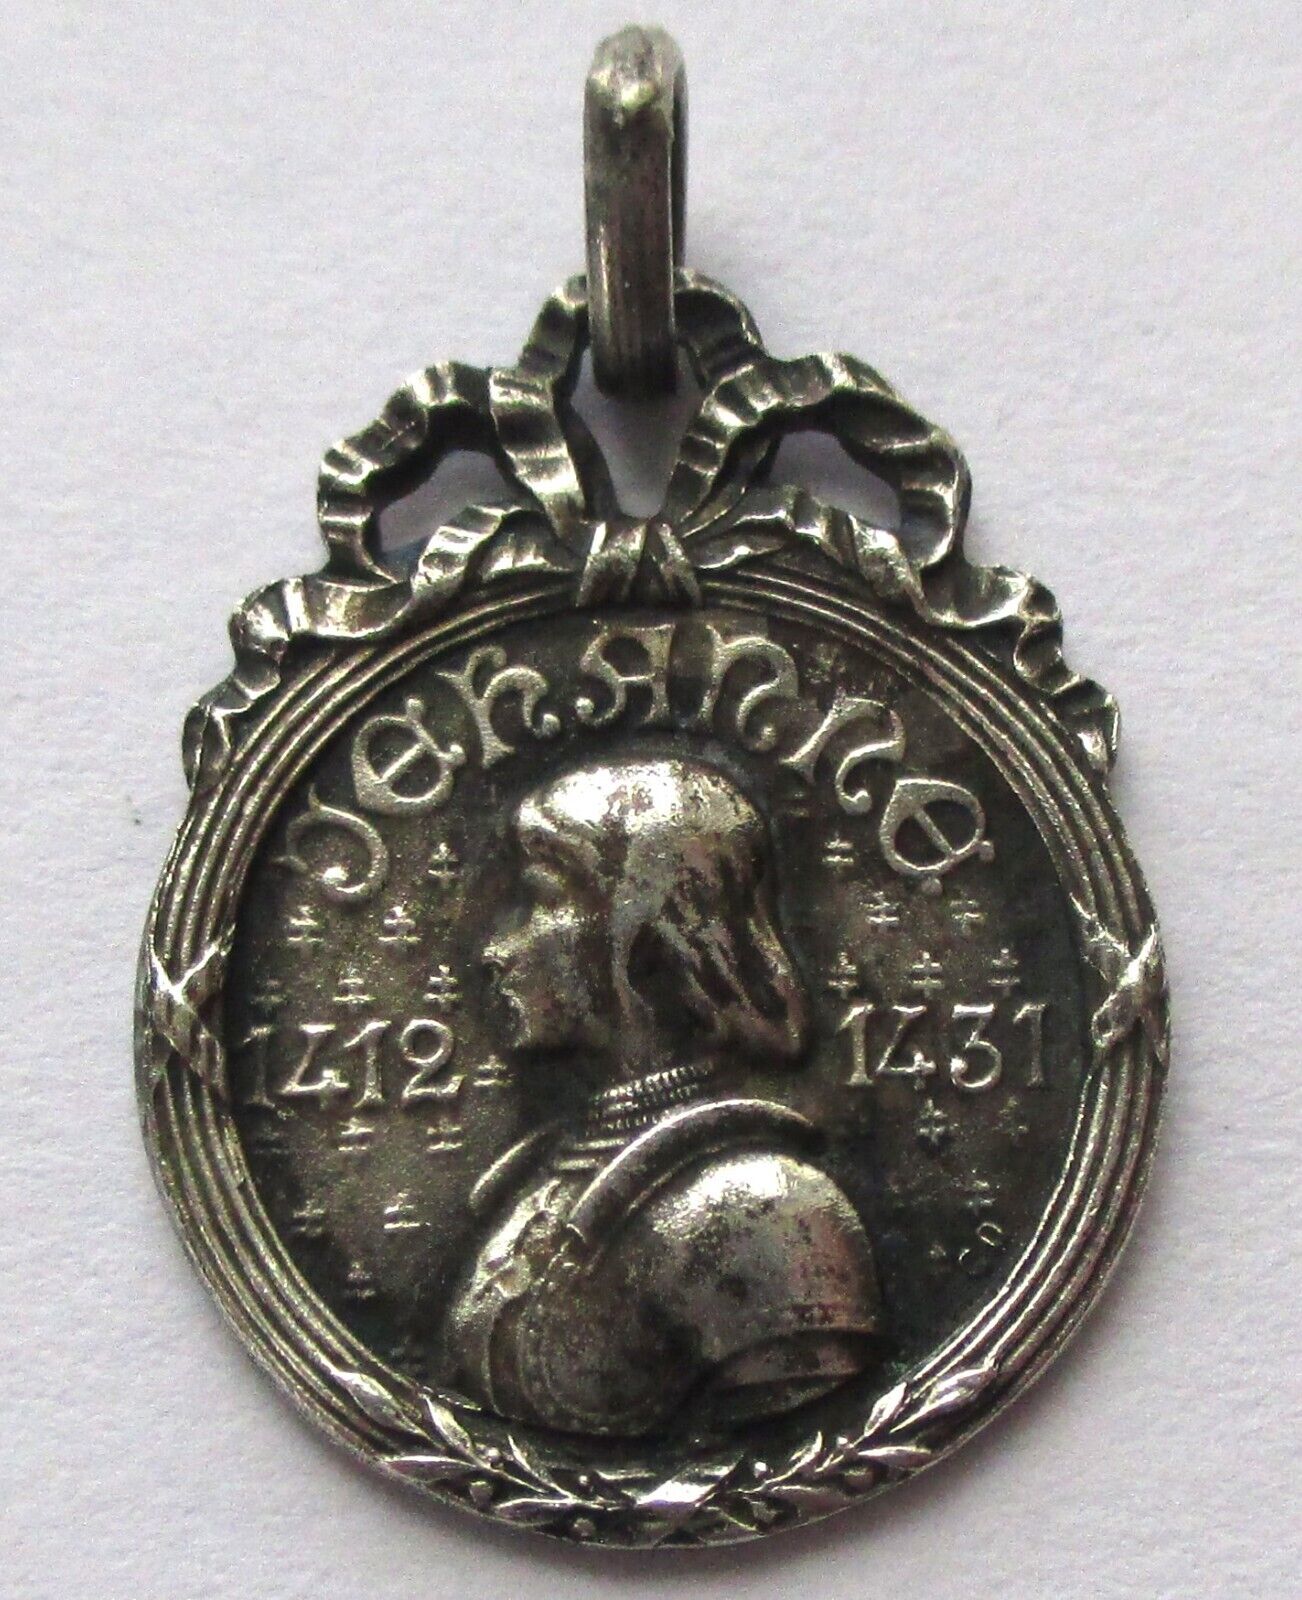 VINTAGE ANTIQUE FRENCH JOAN OF ARC RELIGIOUS MEDAL CHARM Signed GD SILVER PLATED